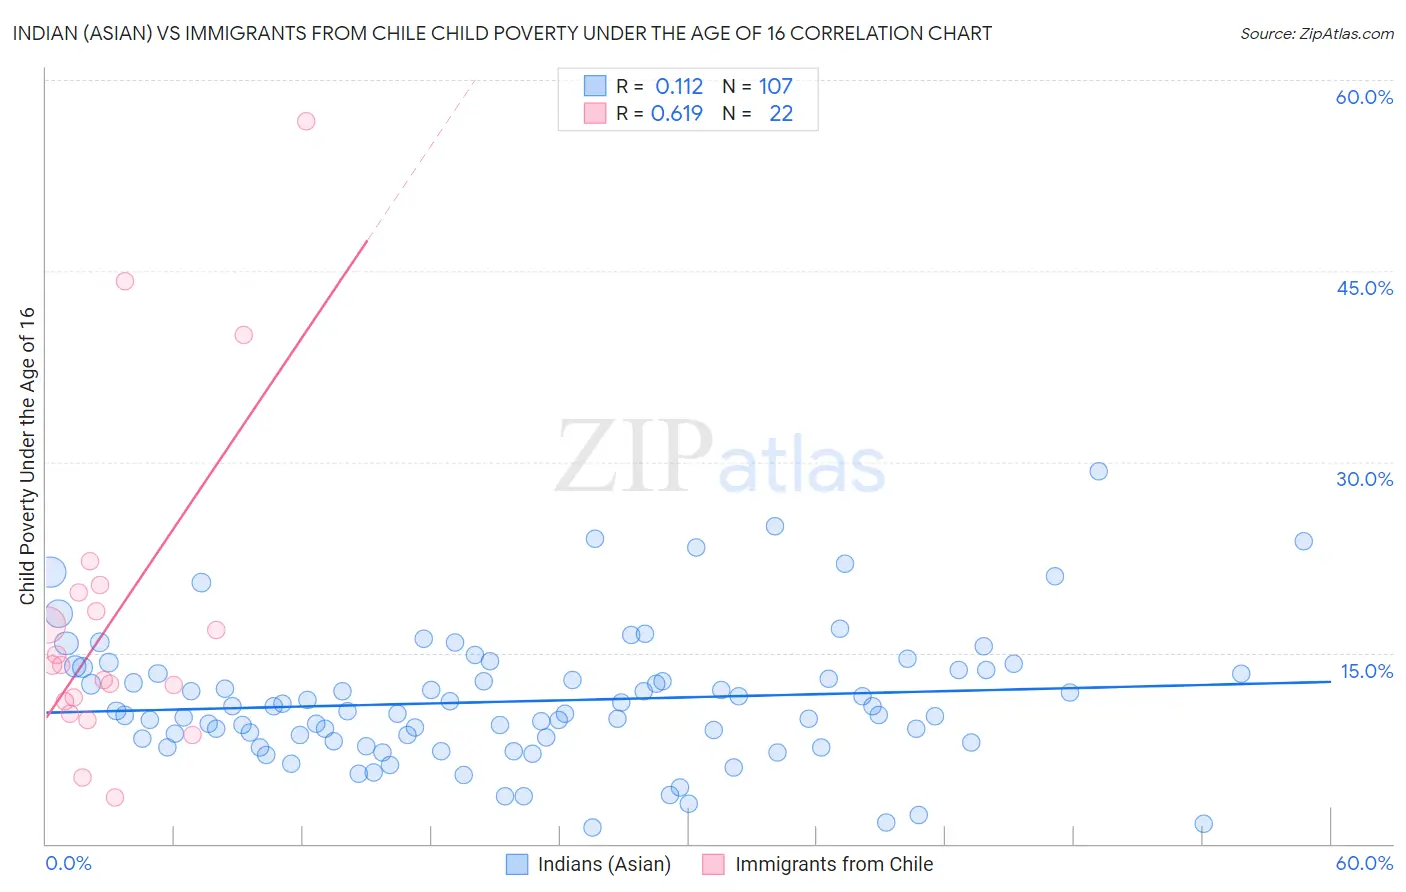 Indian (Asian) vs Immigrants from Chile Child Poverty Under the Age of 16